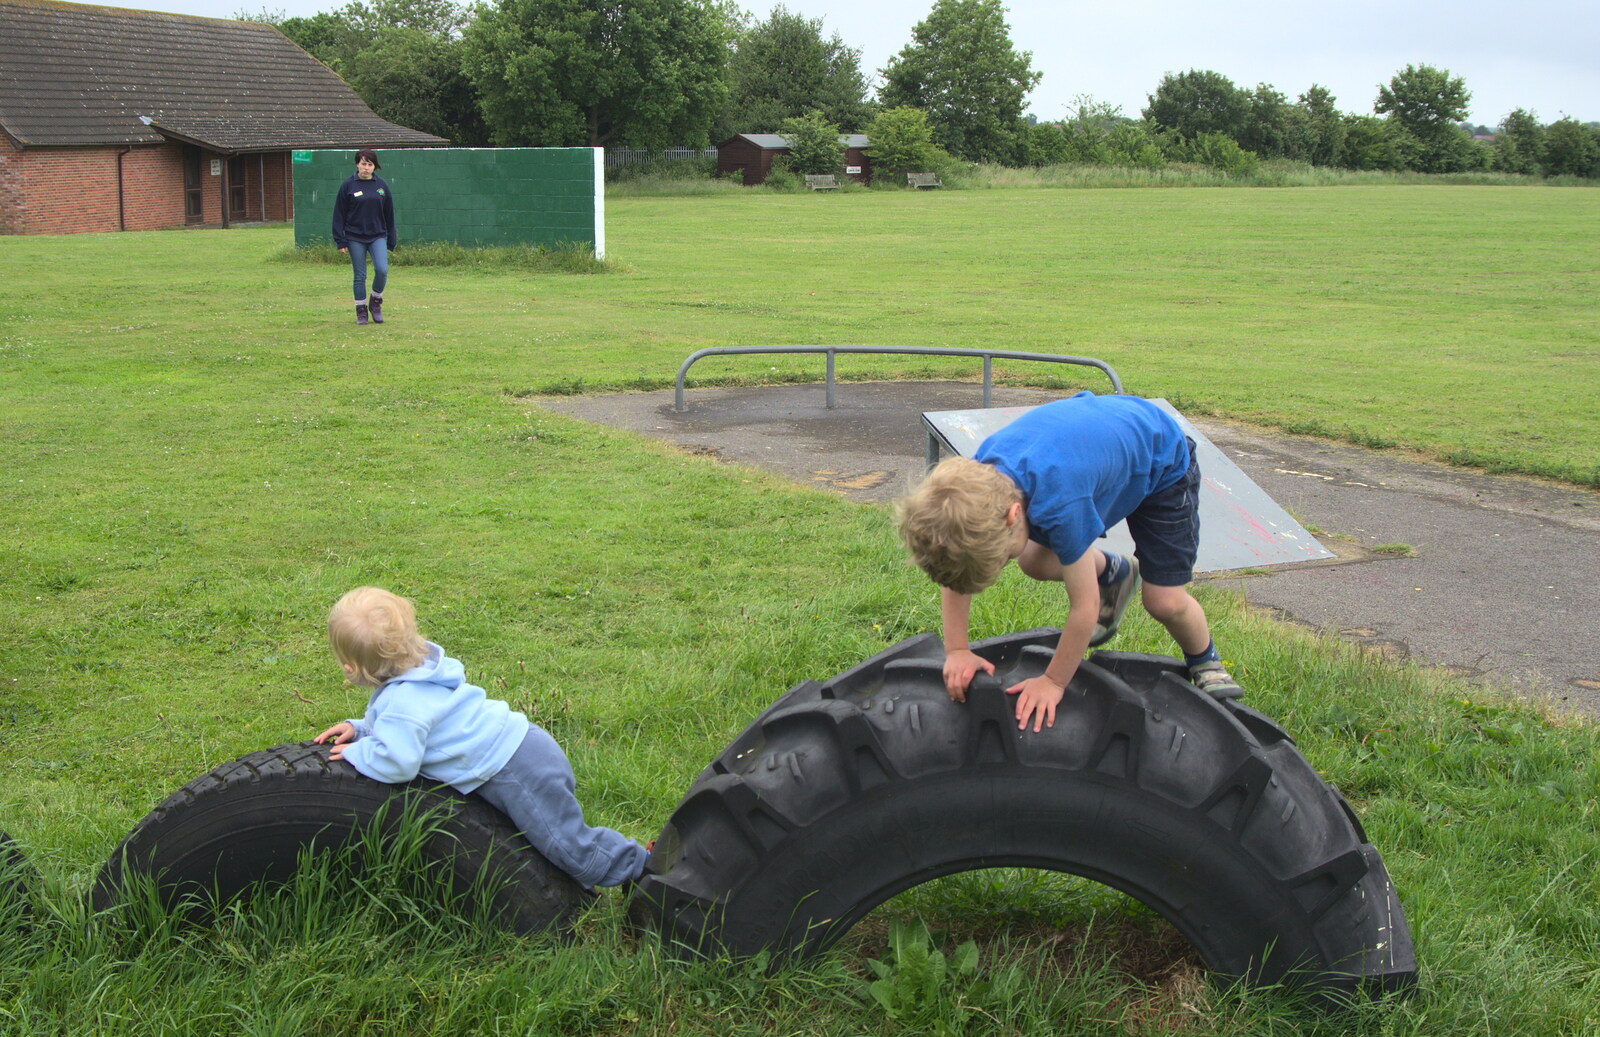 Harry and Fred play on tyres from Thrandeston Pig Roast and Tractors, Thrandeston Little Green, Suffolk - 23rd June 2013